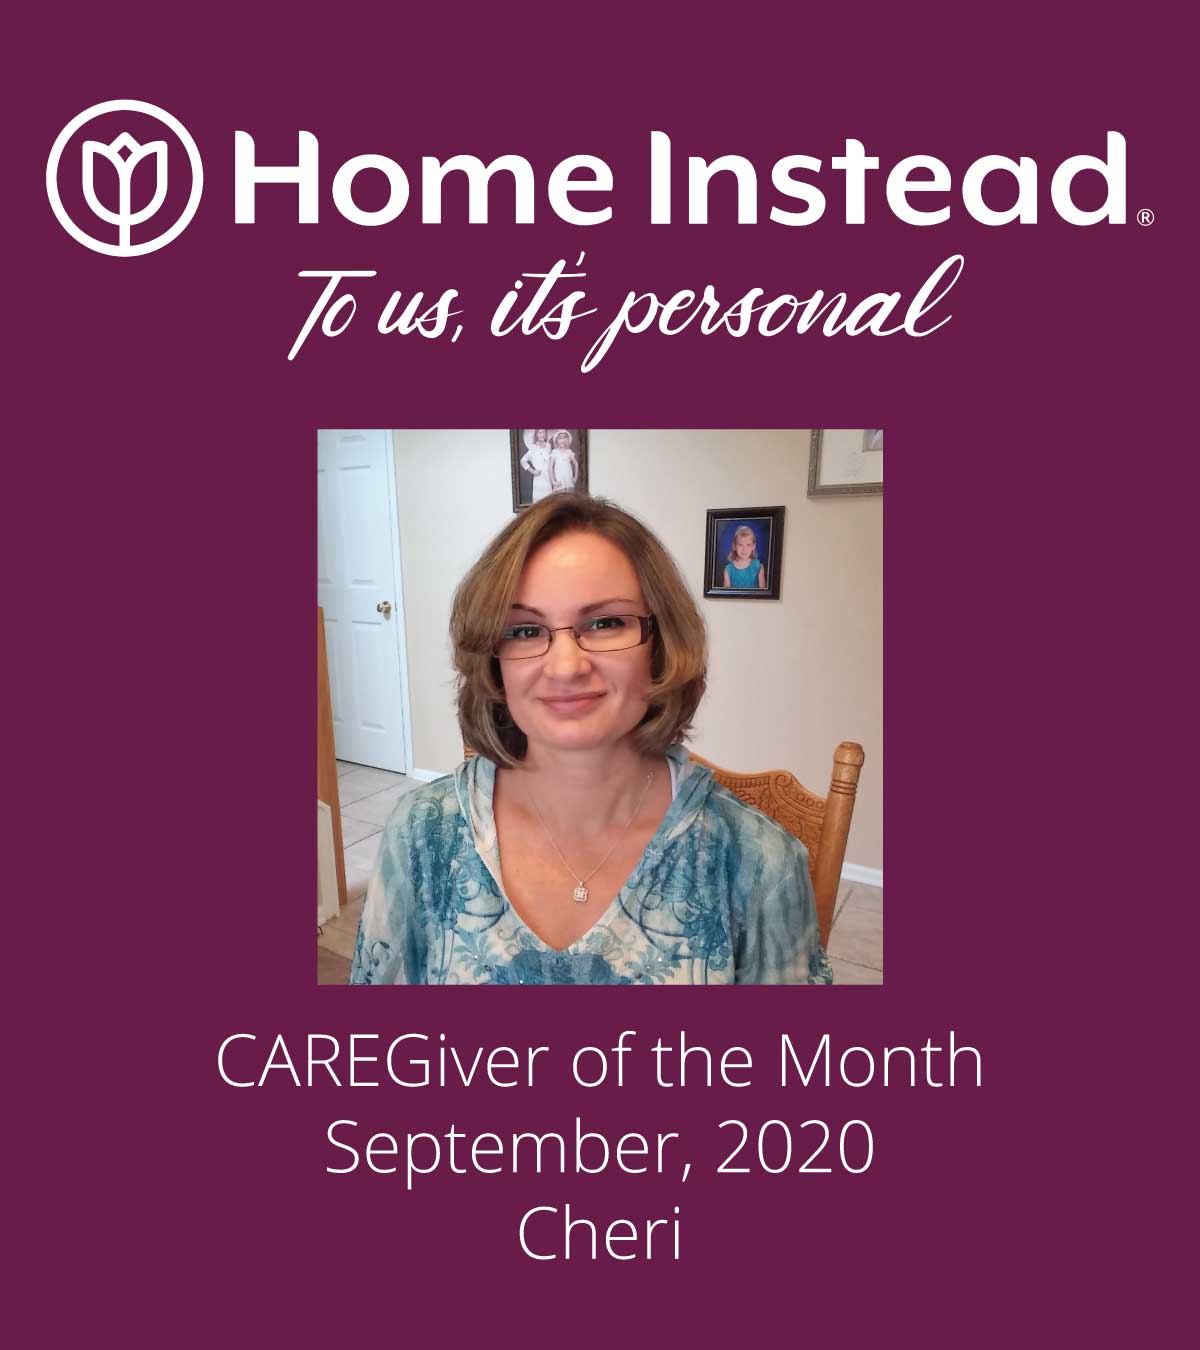 Home Instead Caregiver of the Month Cheri